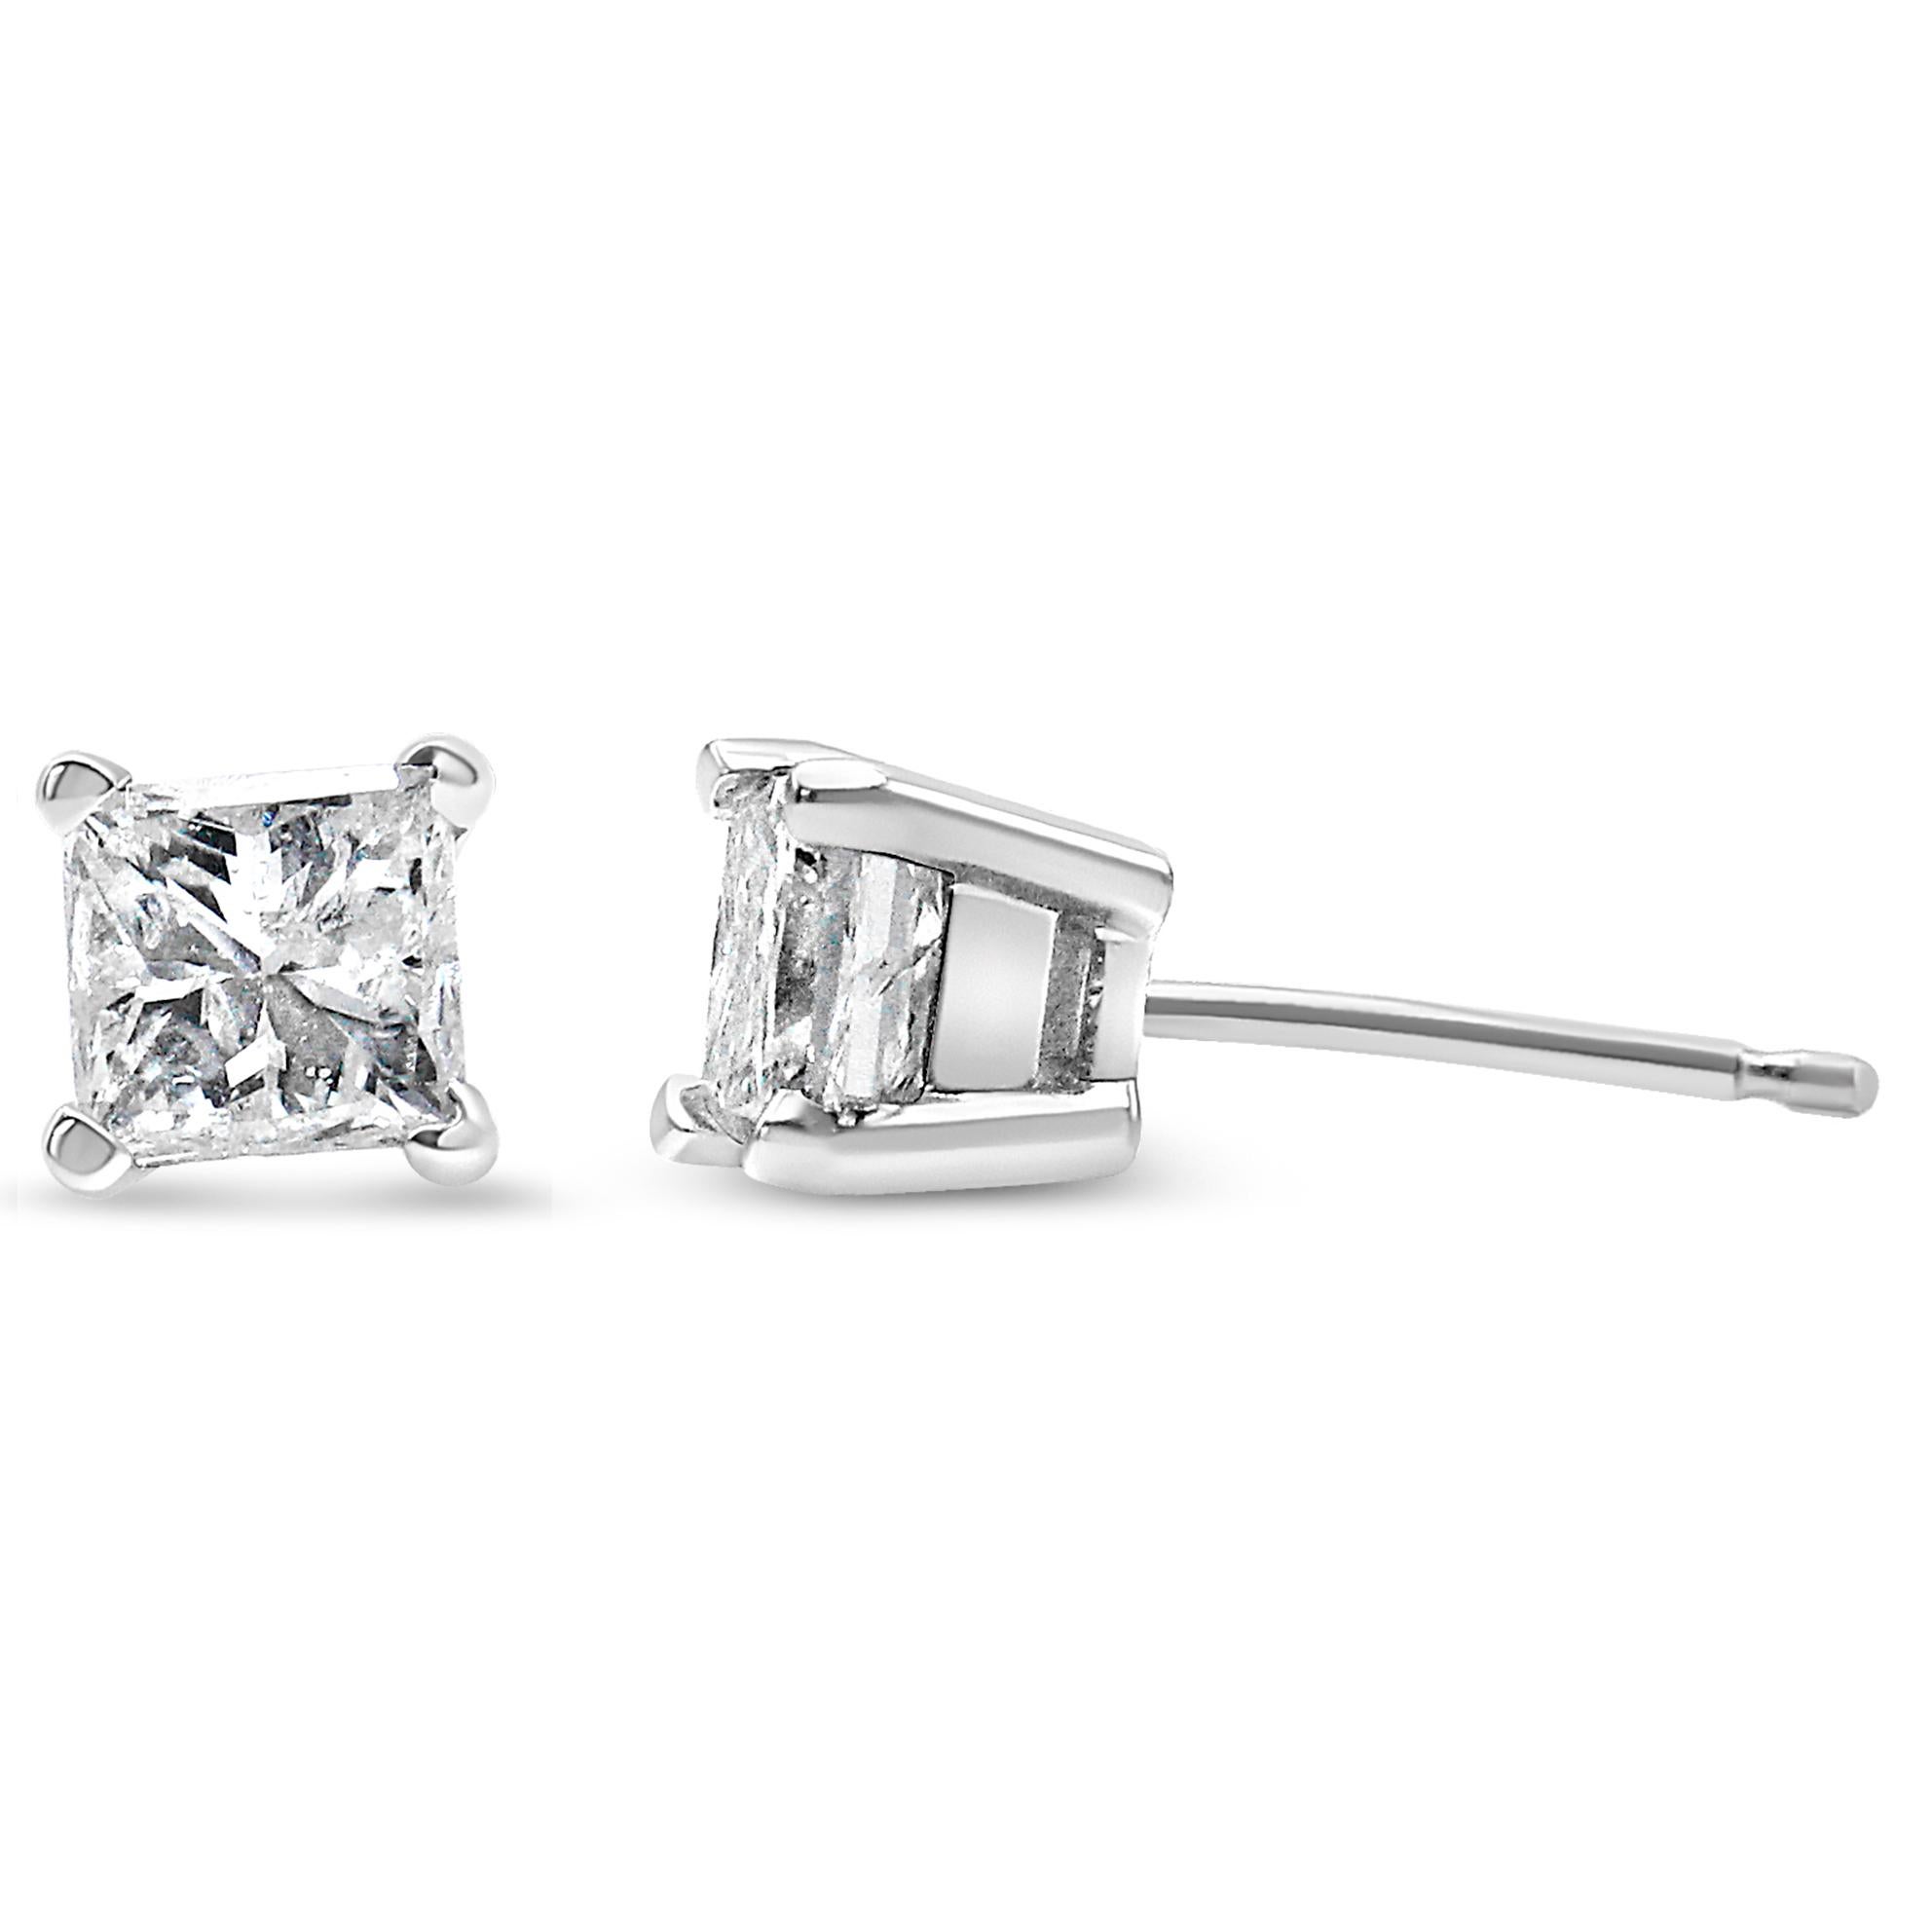 Contemporary 14K White Gold 3/4 Carat Princess Cut Diamond Solitaire Stud Earrings For Sale